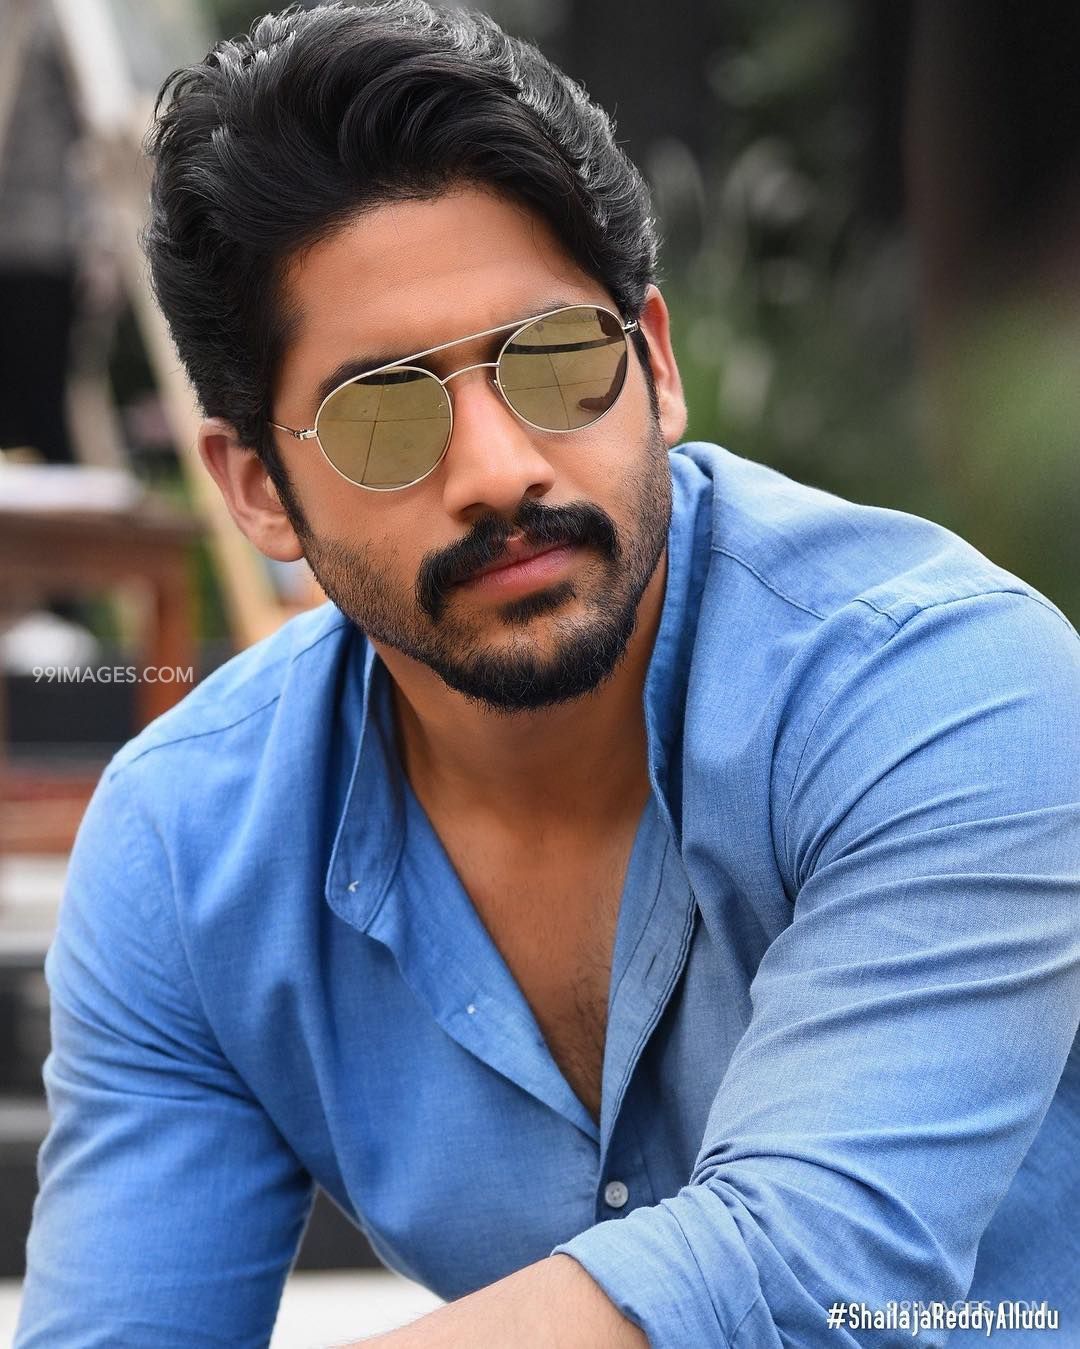 Naga Chaitanya recently made his Bollywood debut with Aamir Khan in the movie Laal Singh Chaddha